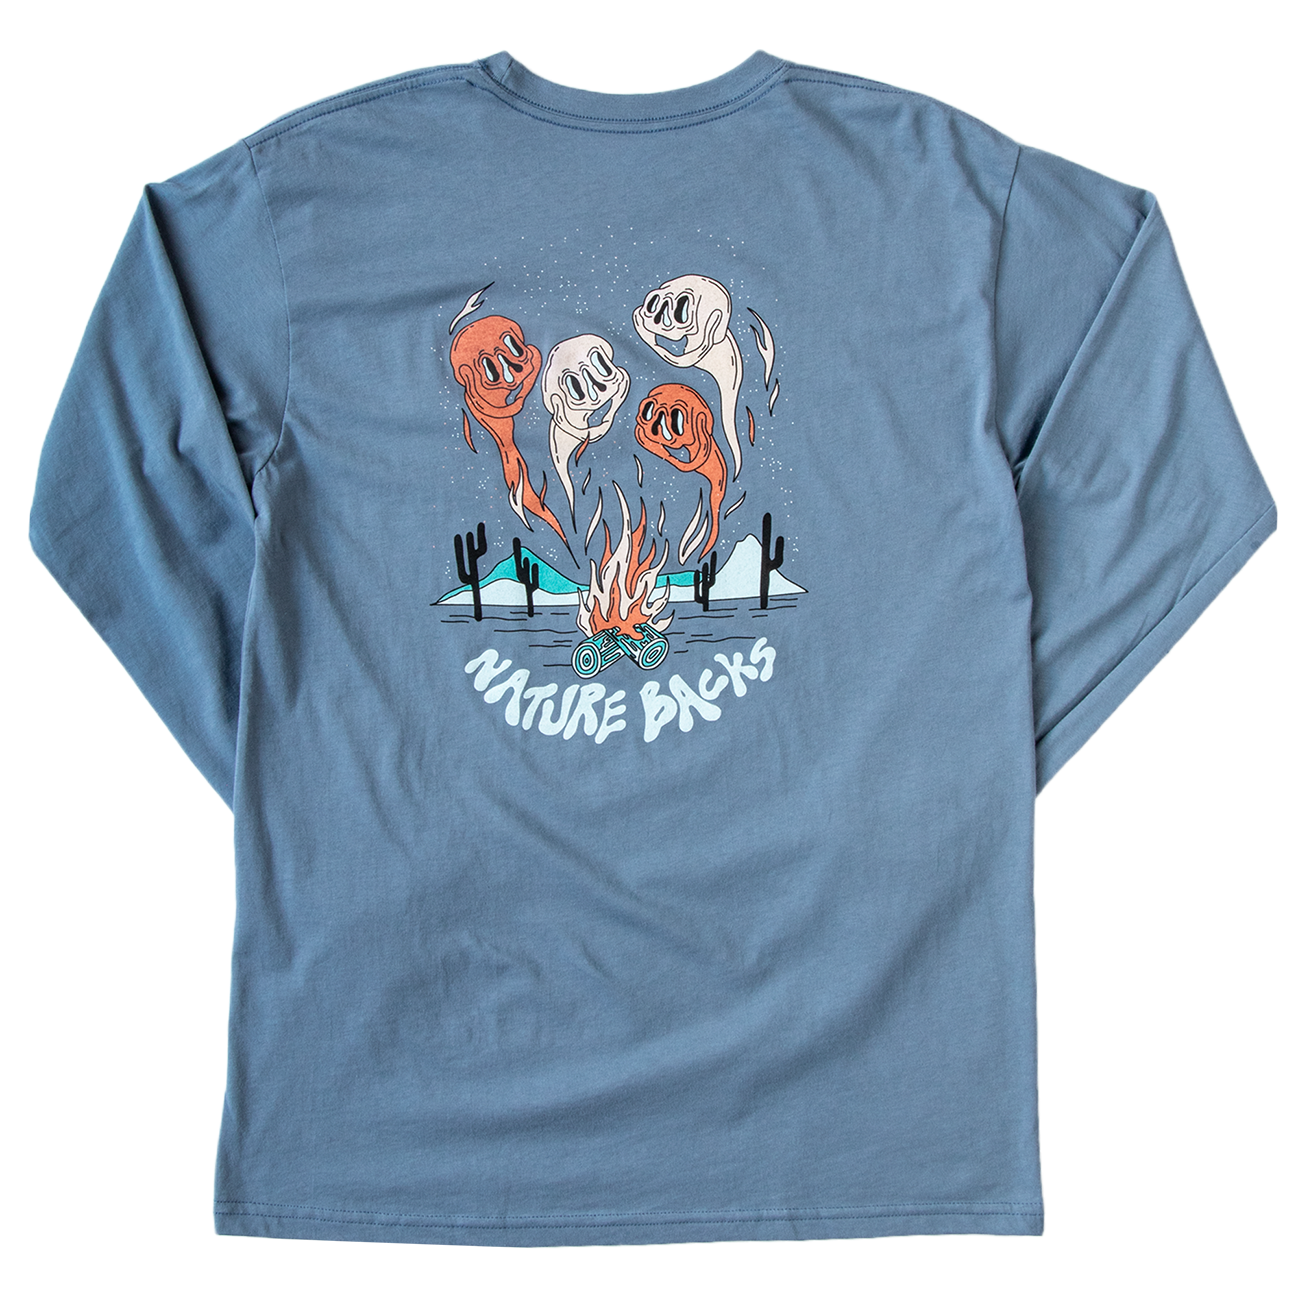 Nature Backs Limited Edition Long Sleeve 100% Organic Cotton T-Shirt | Limited Spark Fog Long Sleeve made with Eco-Friendly Fibers Sustainably made in the USA 